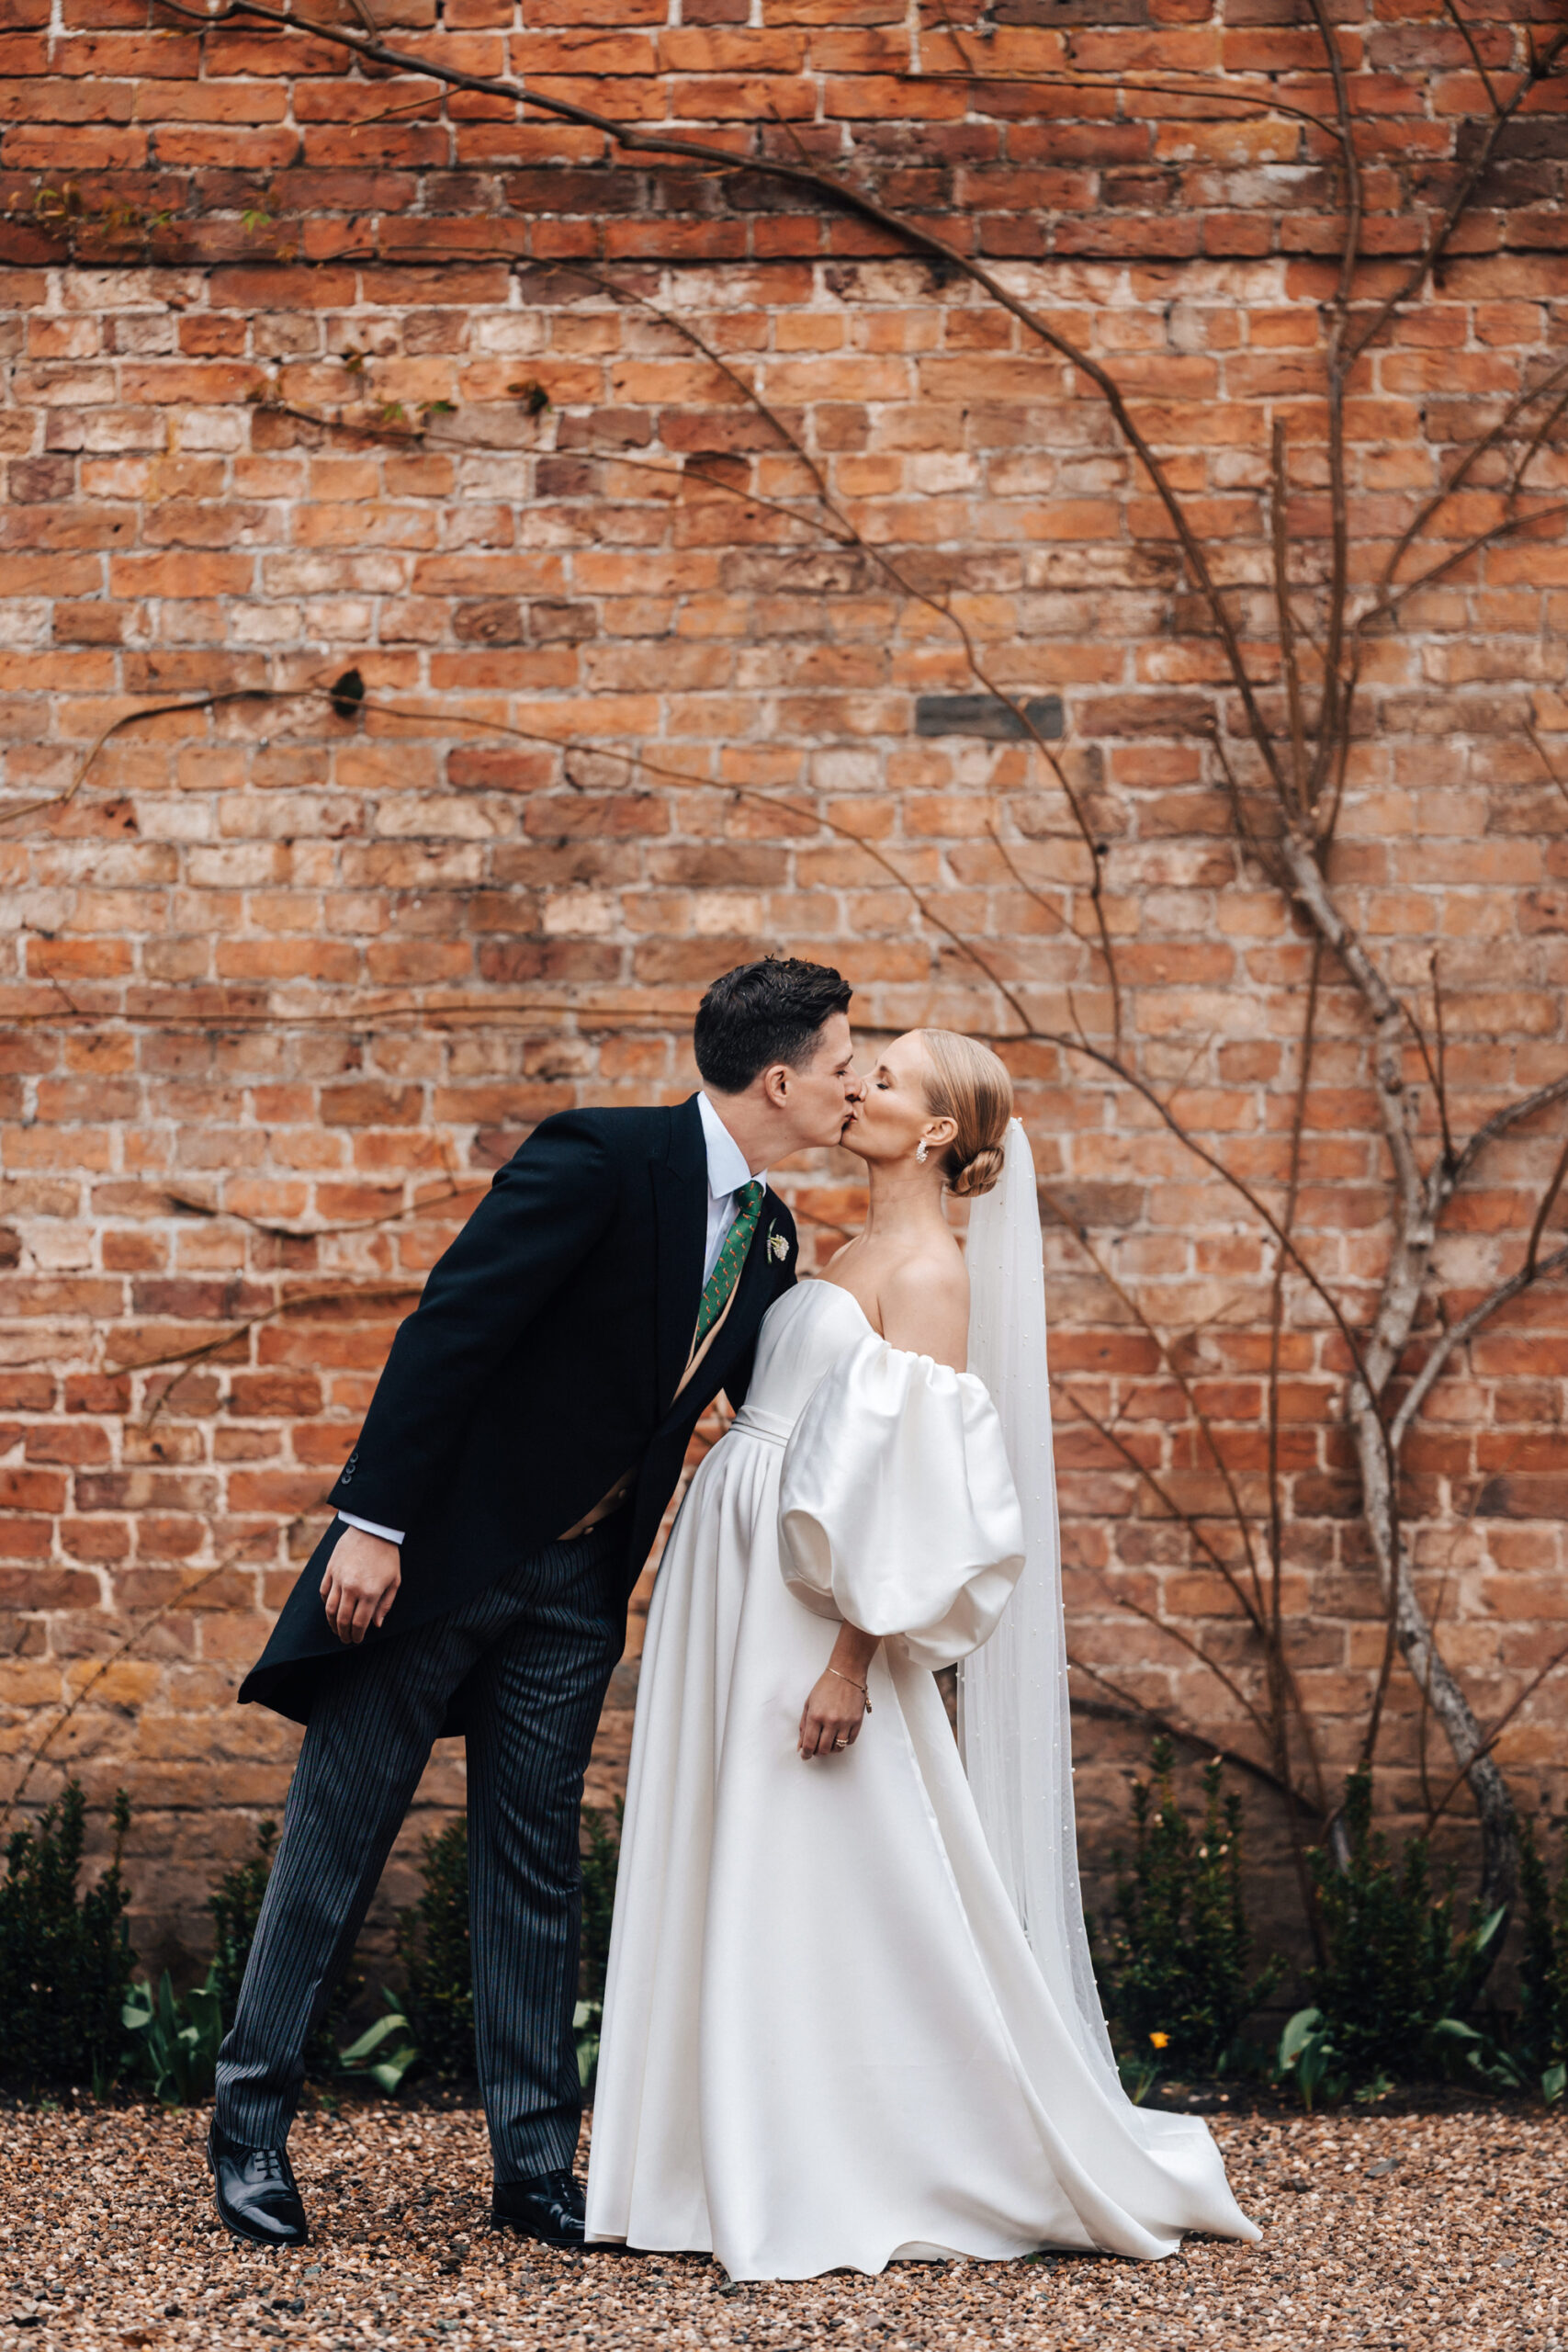 Bride and groom by red brick wall that has climbing roses growing up it to give her a kiss